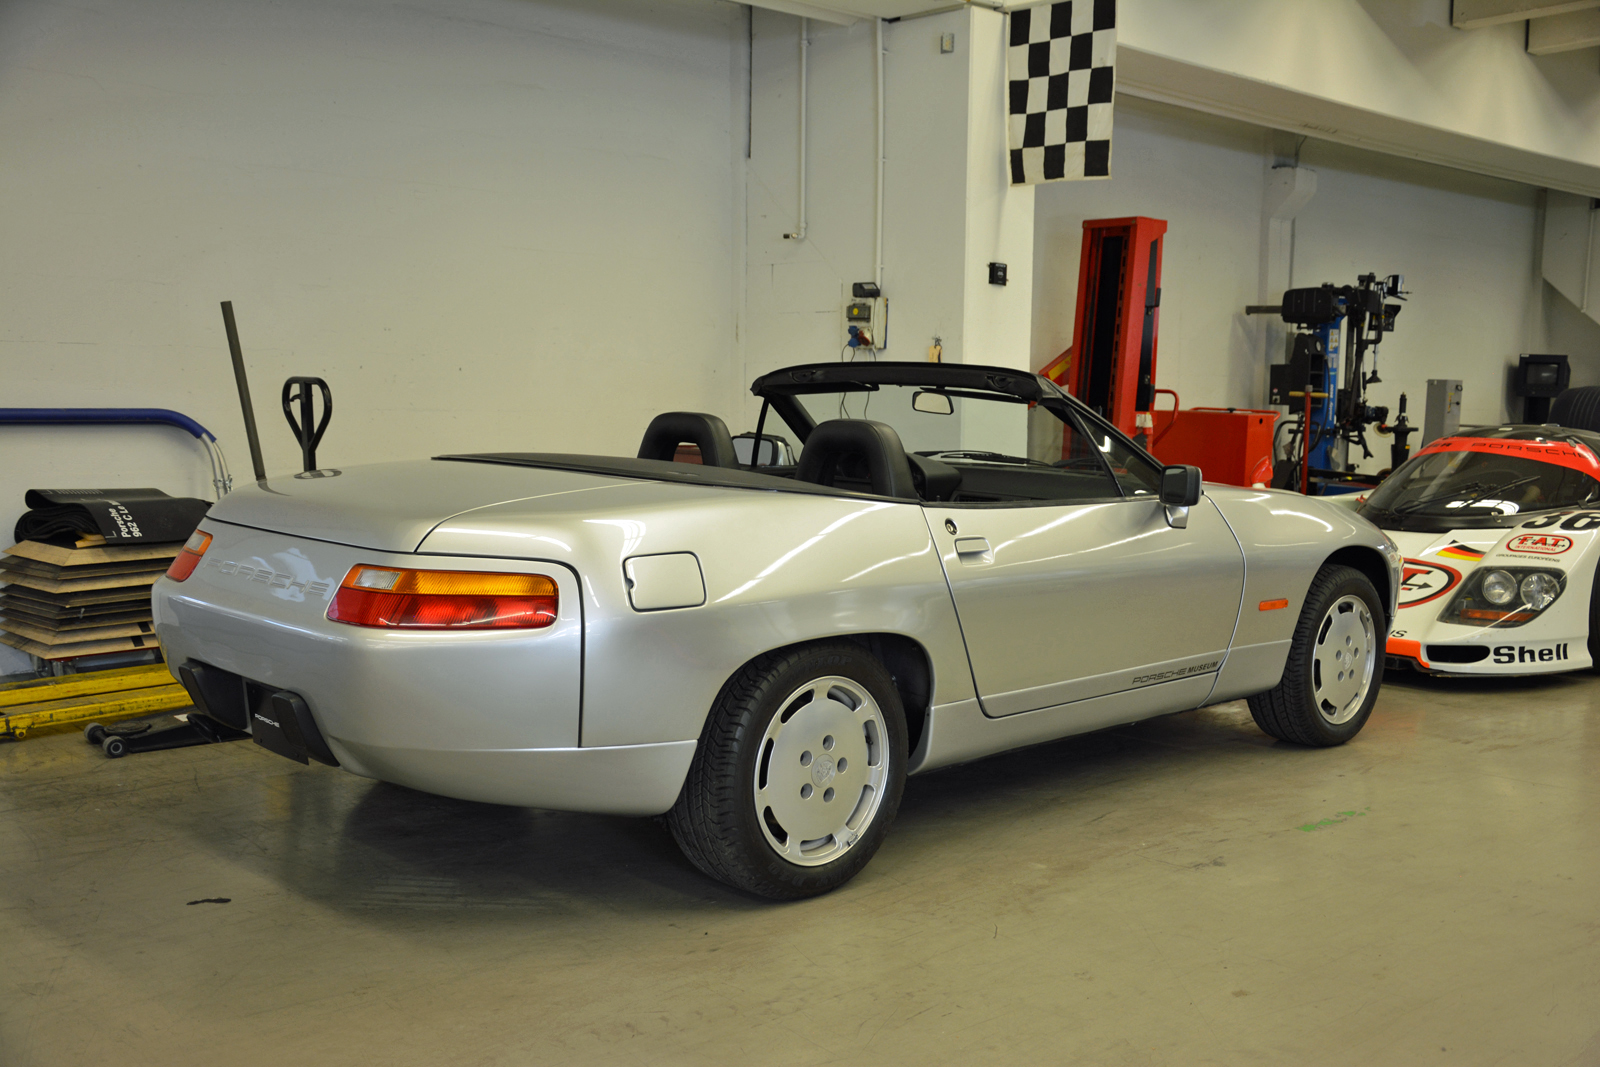 <p>The convertible was all but identical to the standard 928 from the rocker panels up to the belt line. Above that, it gained a long deck lid and a cloth soft top which was stored directly behind the passenger compartment. The convertible conversion transformed the 928 from a 2+2 into a two-seater, and made it <strong>110 lb </strong>heavier.</p>